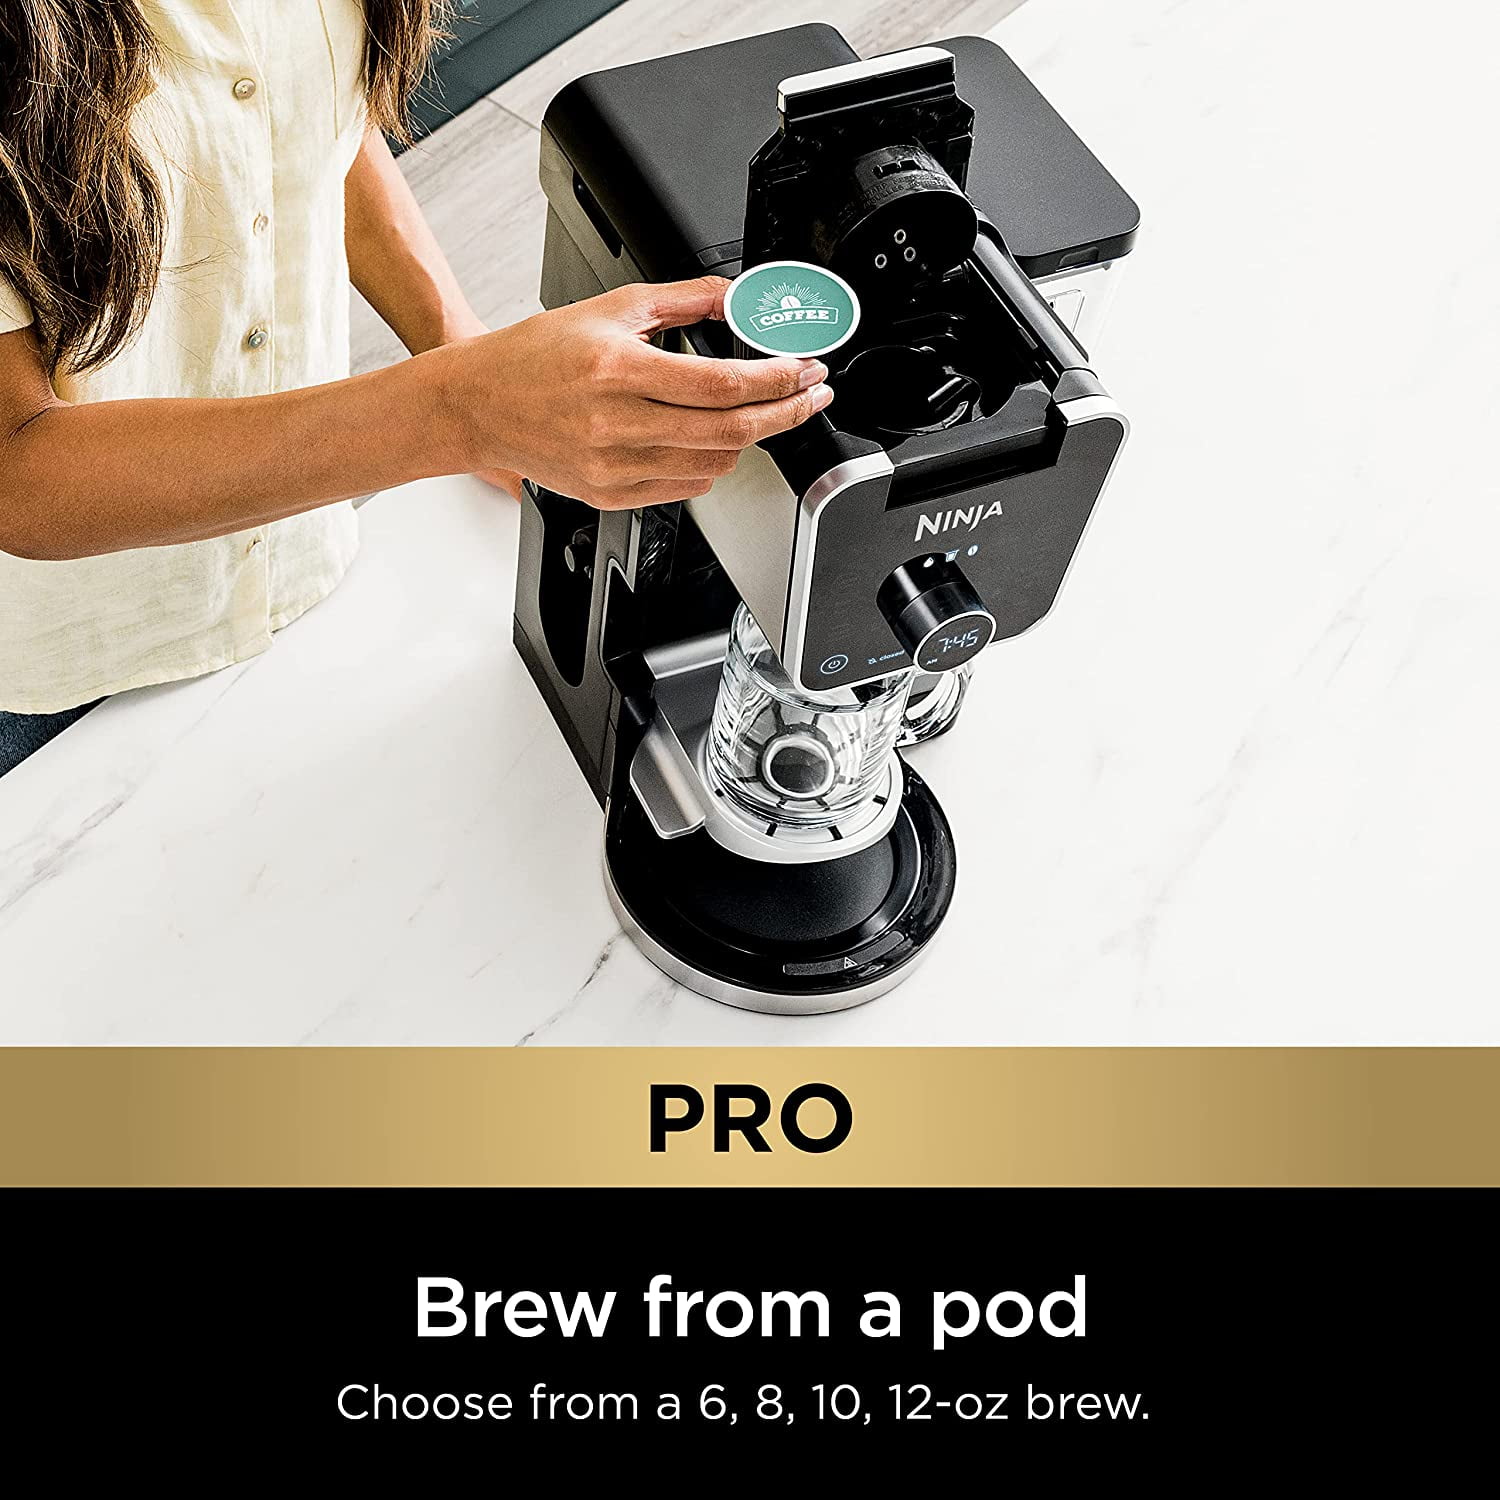 Make Any Type of Coffee with the Ninja CFP307 DualBrew Pro